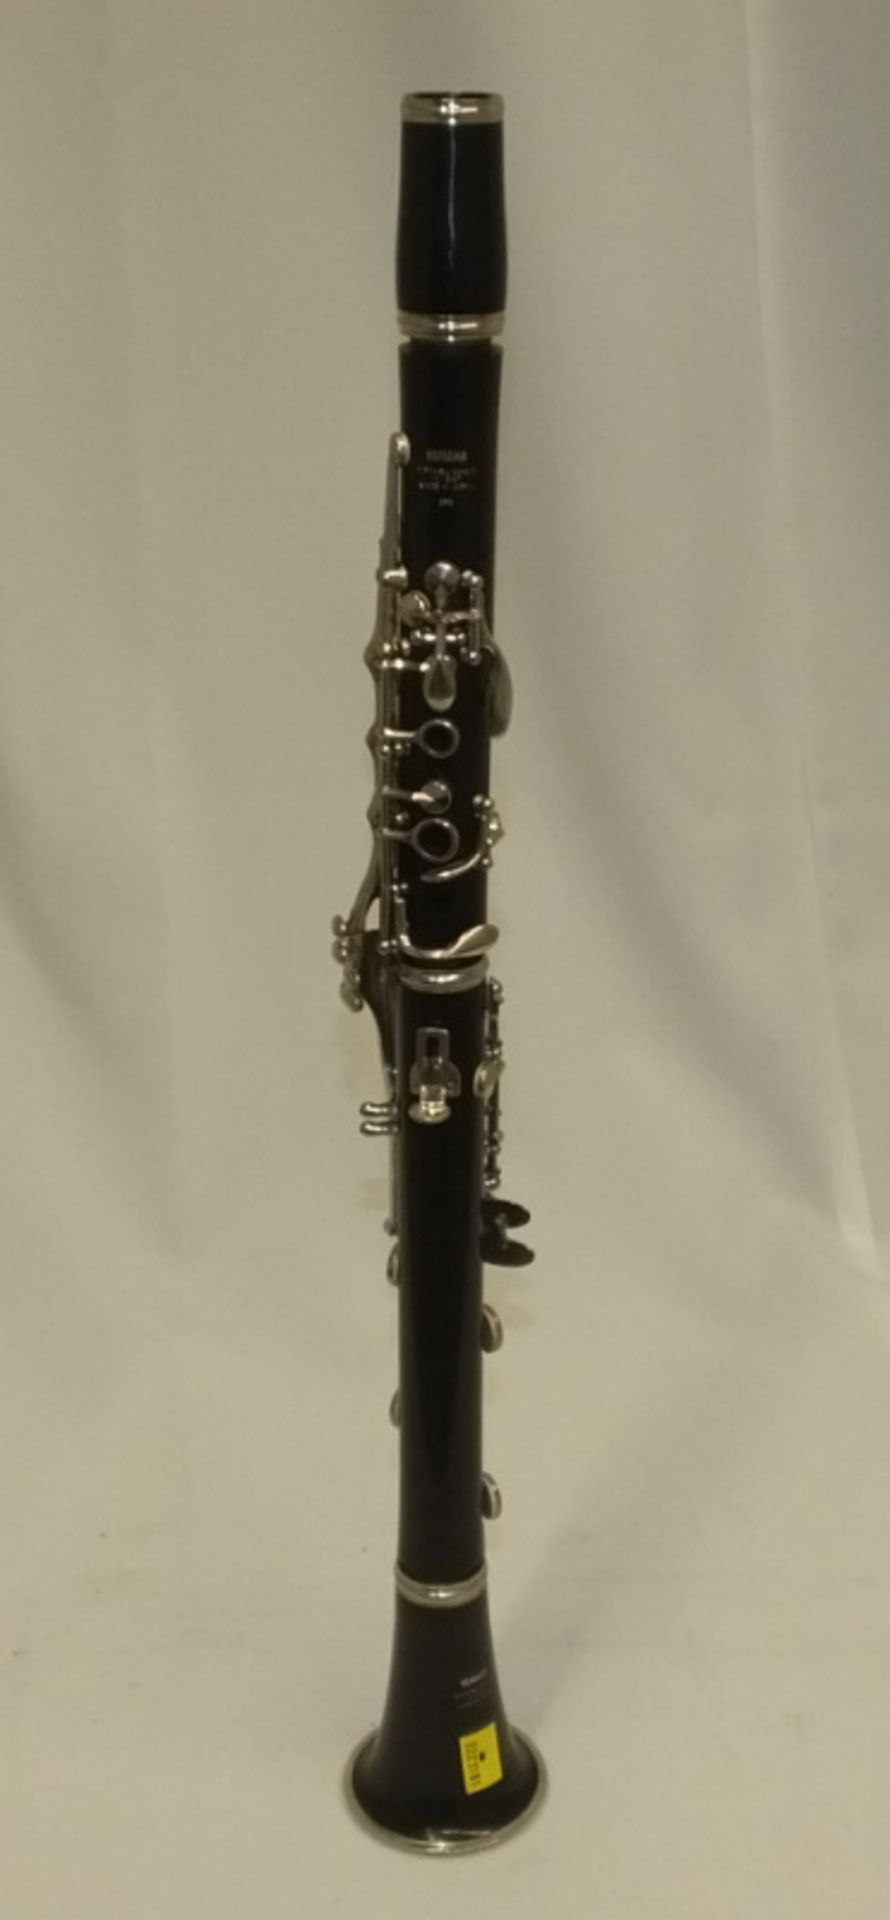 Yamaha 26II Clarinet (incomplete - no mouthpiece) in case - serial number 083375 - Image 12 of 13